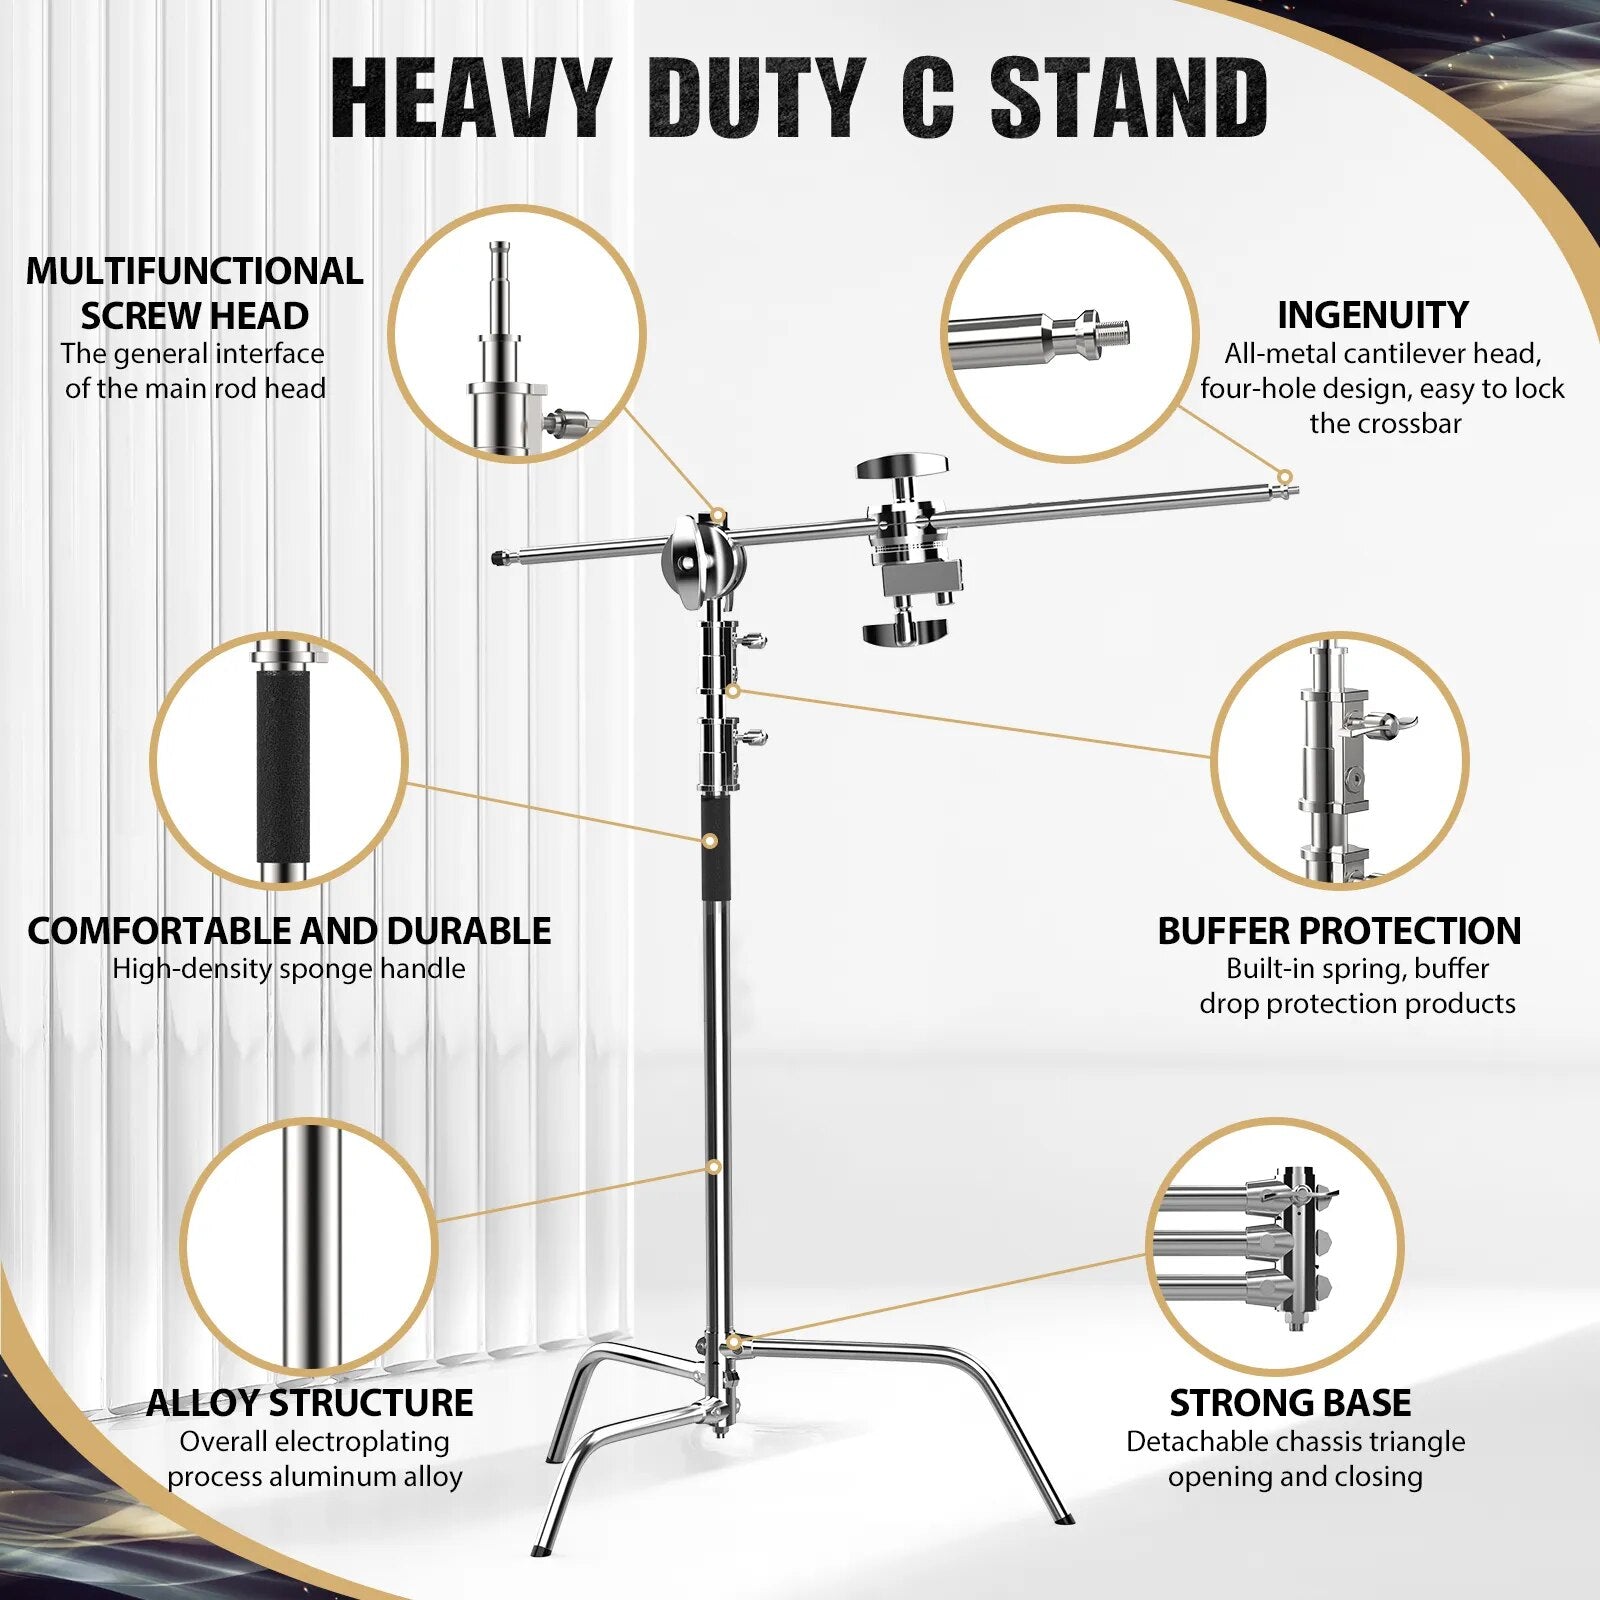 2.6/3.3m C-stand Tripod Photography Light Stand 100% Metal 8.53FT With Boom Arm Professional For Photo Studio Softbox Reflector